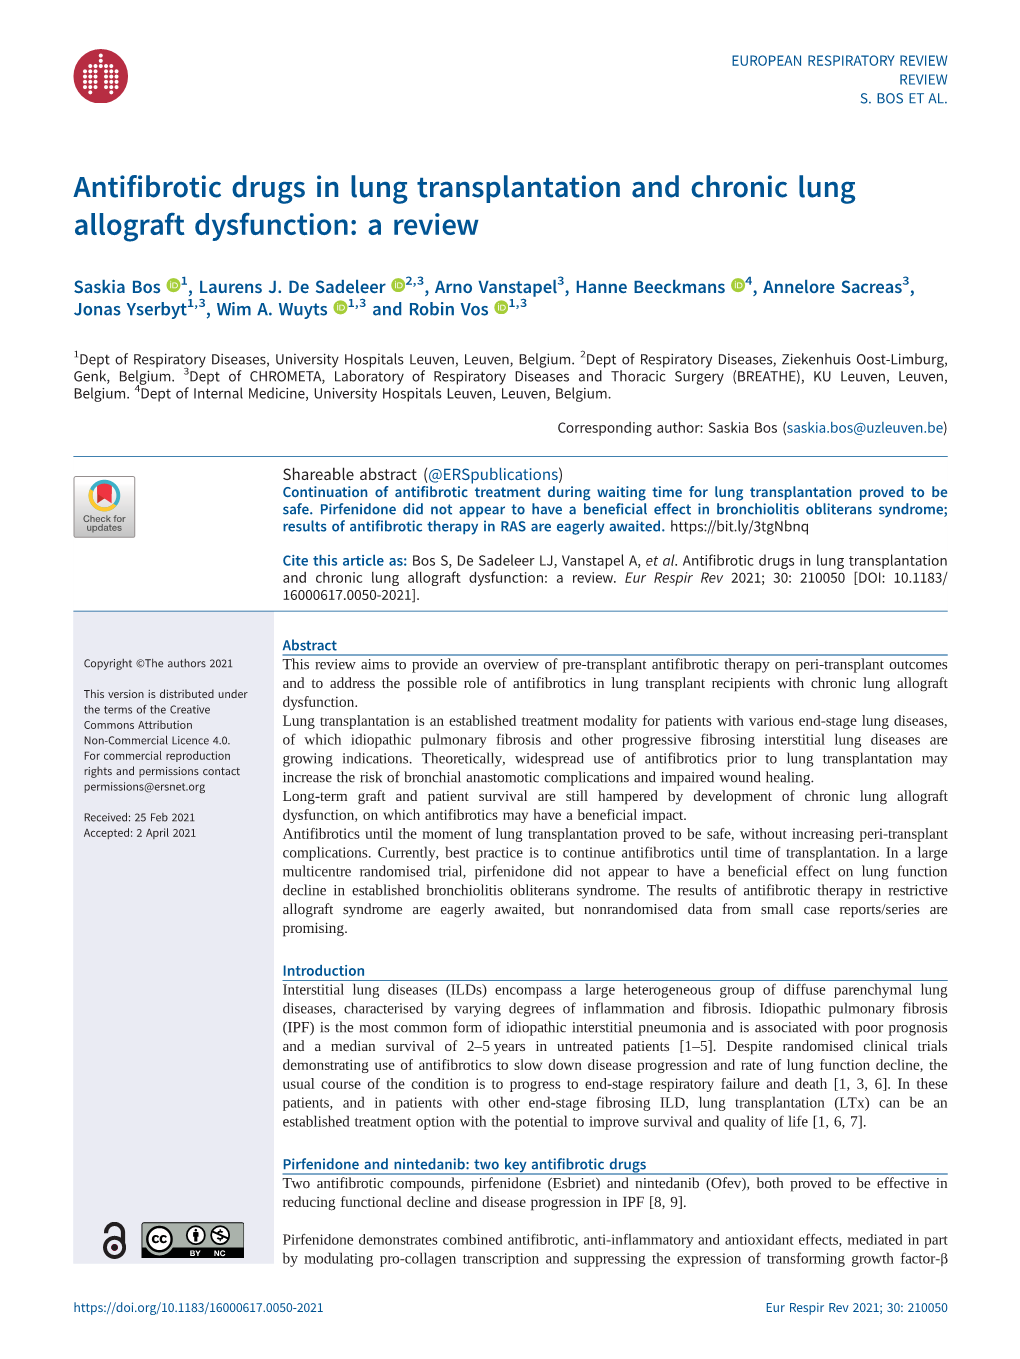 Antifibrotic Drugs in Lung Transplantation and Chronic Lung Allograft Dysfunction: a Review